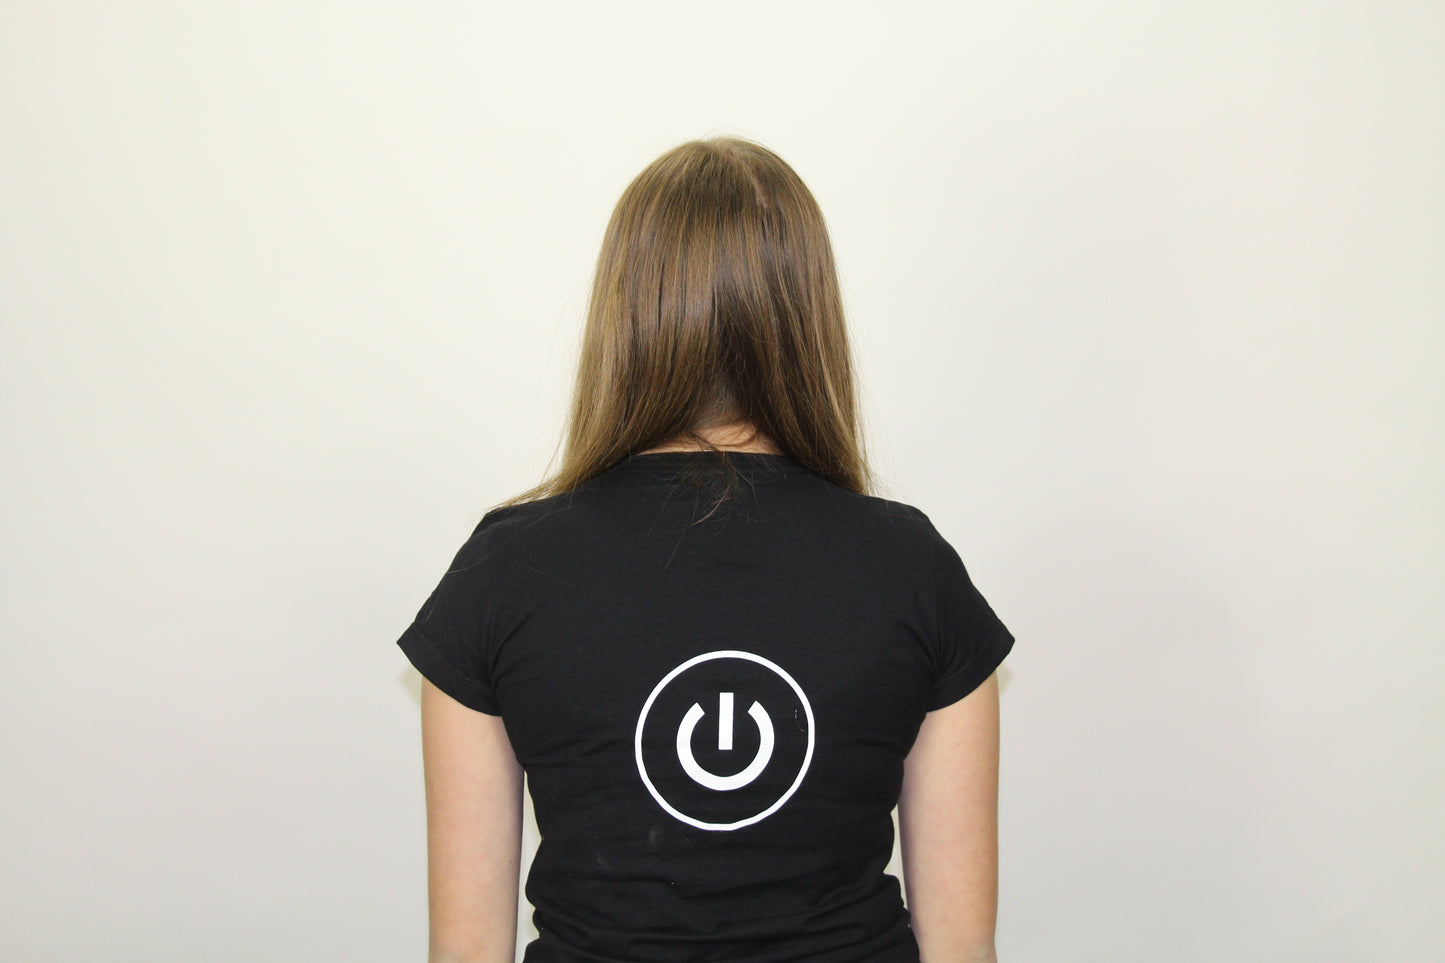 iBored, Black Powerup T-Shirt (Mens and Ladies cuts)